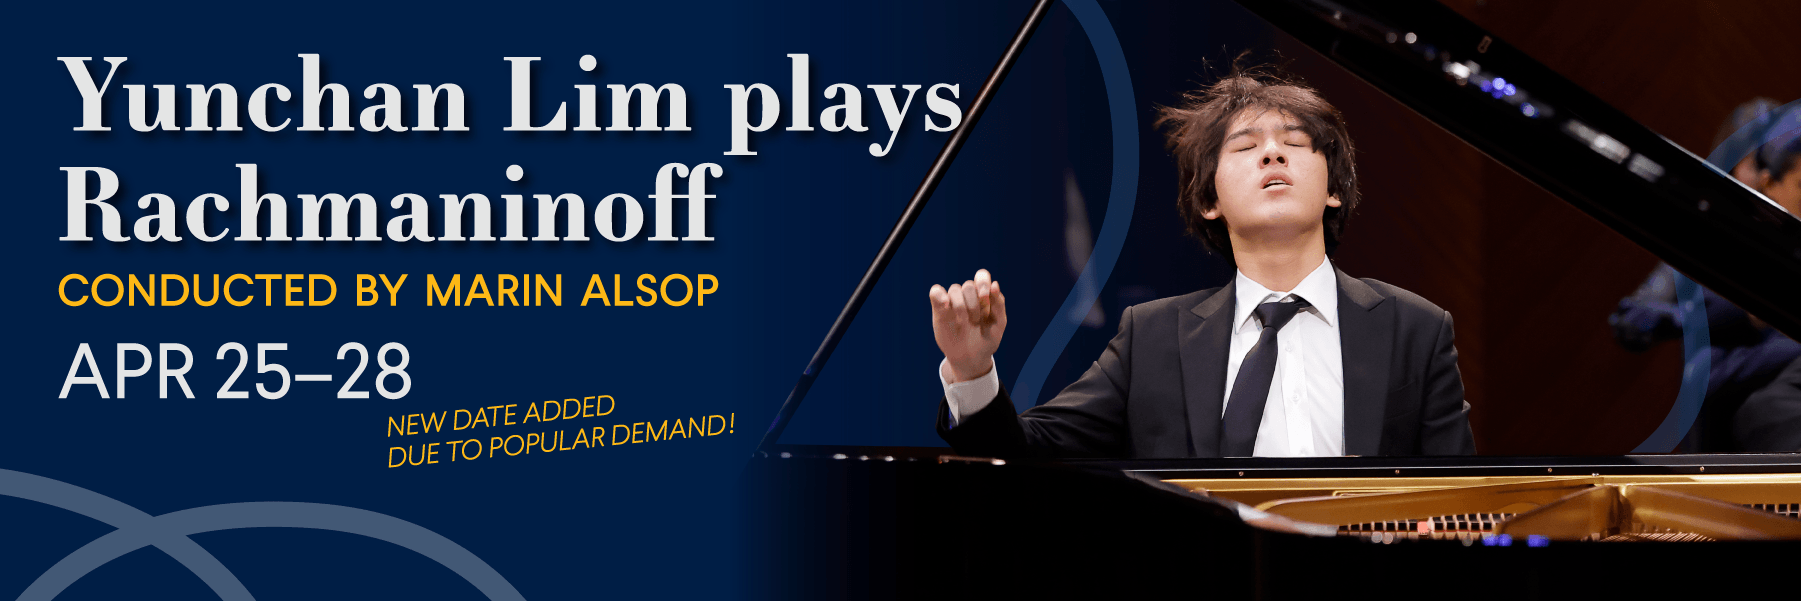 Featured image for “This Week at the BSO: Alsop and Rachmaninoff featuring Yunchan Lim, and GospelFest with Donald Lawrence”